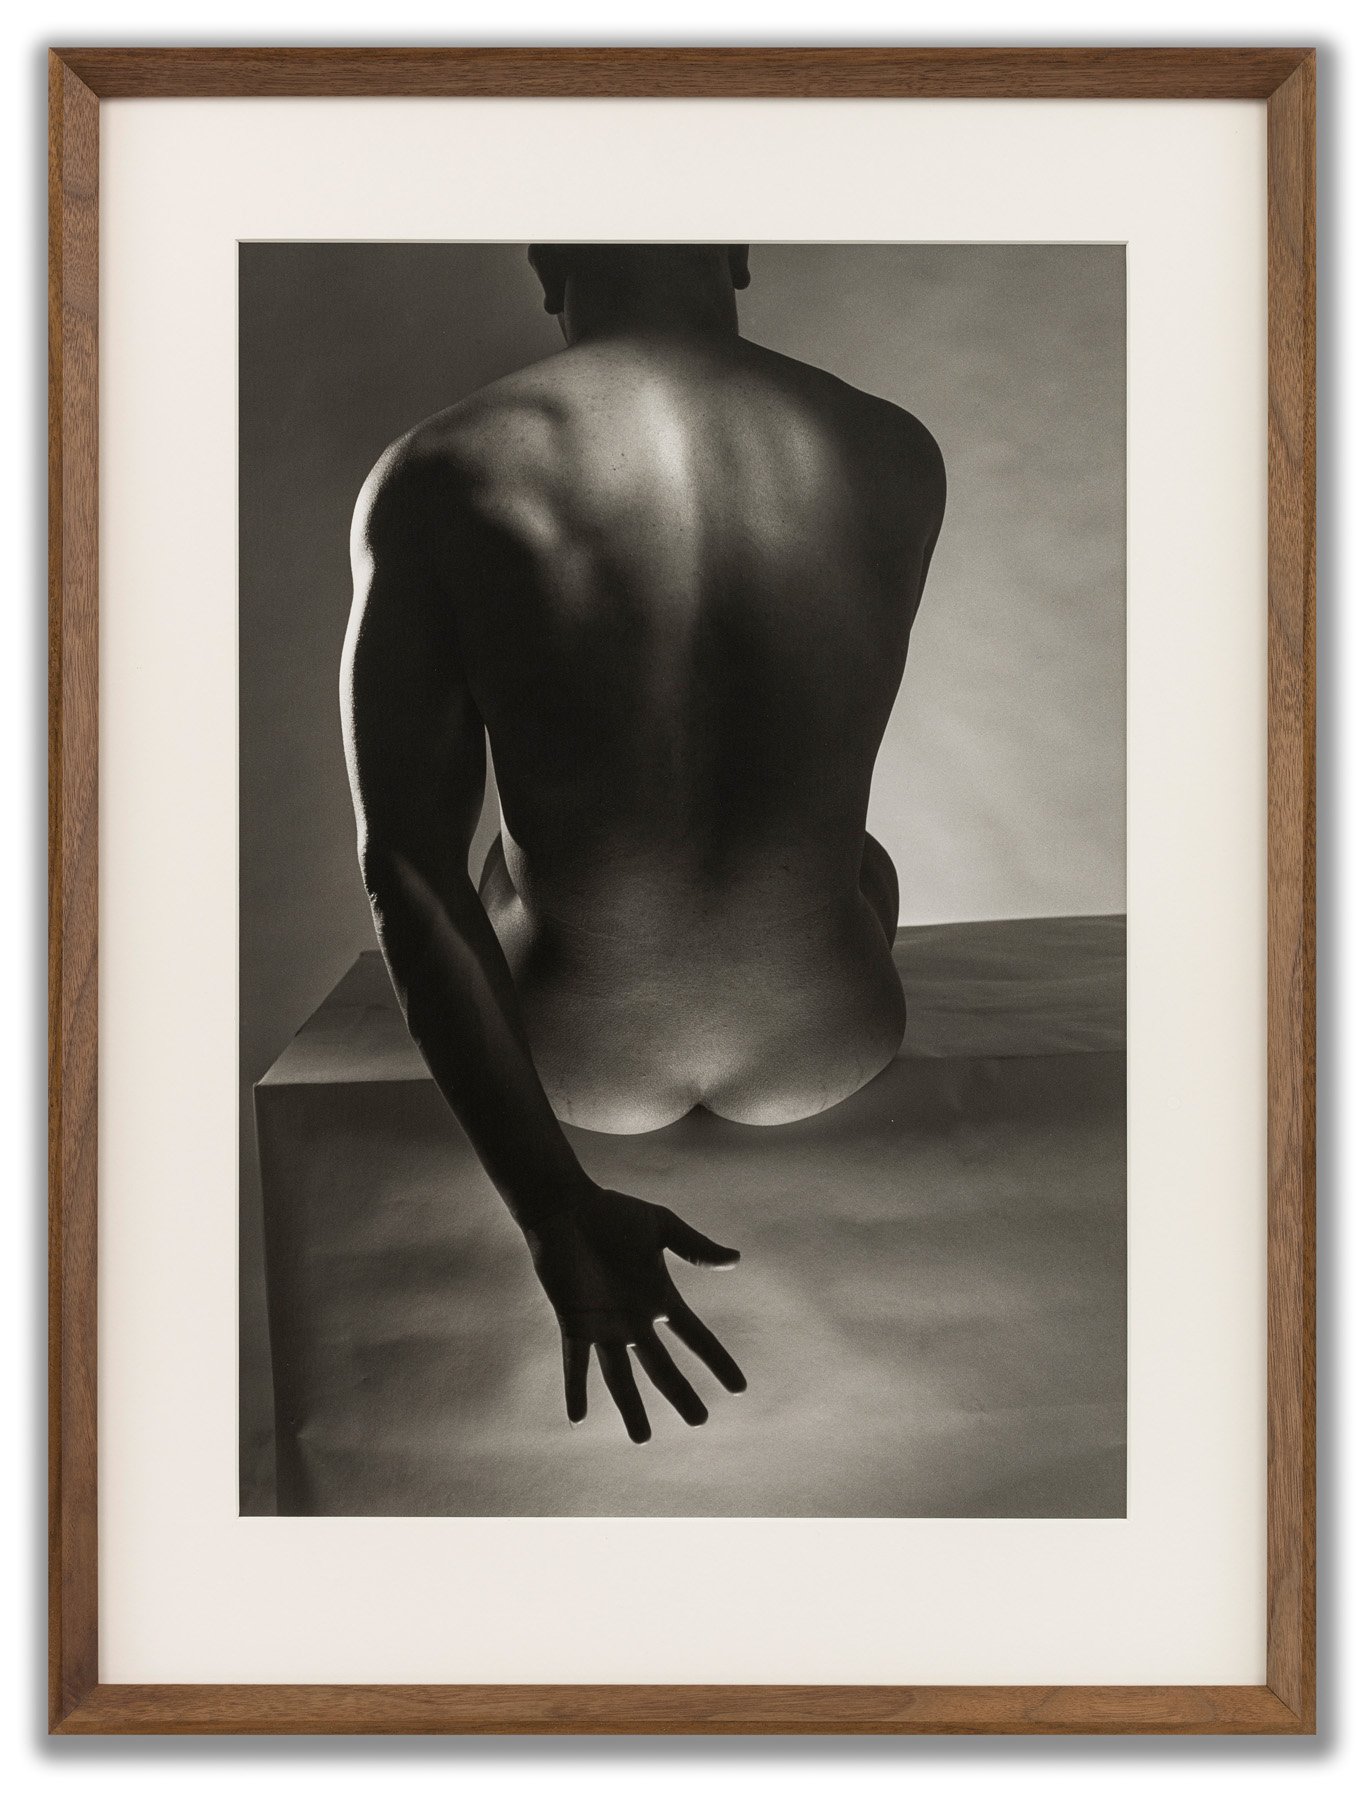 Horst P. Horst, (American 1906-1999), Male Nude, 1952